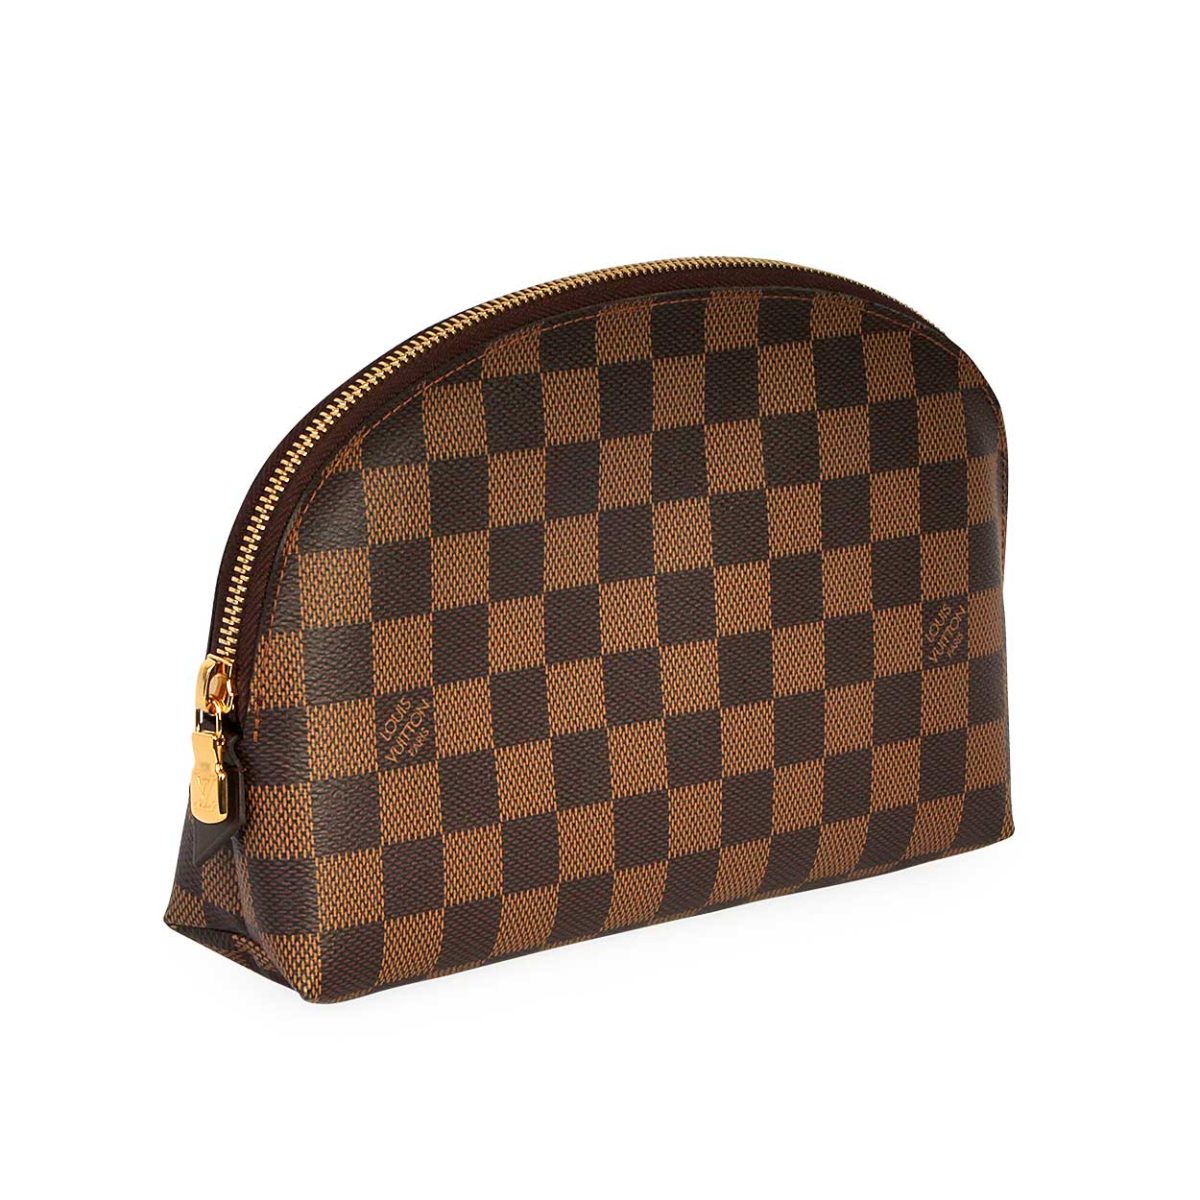 LOUIS VUITTON Damier Ebene Cosmetic Pouch GM - NEW | Luxity